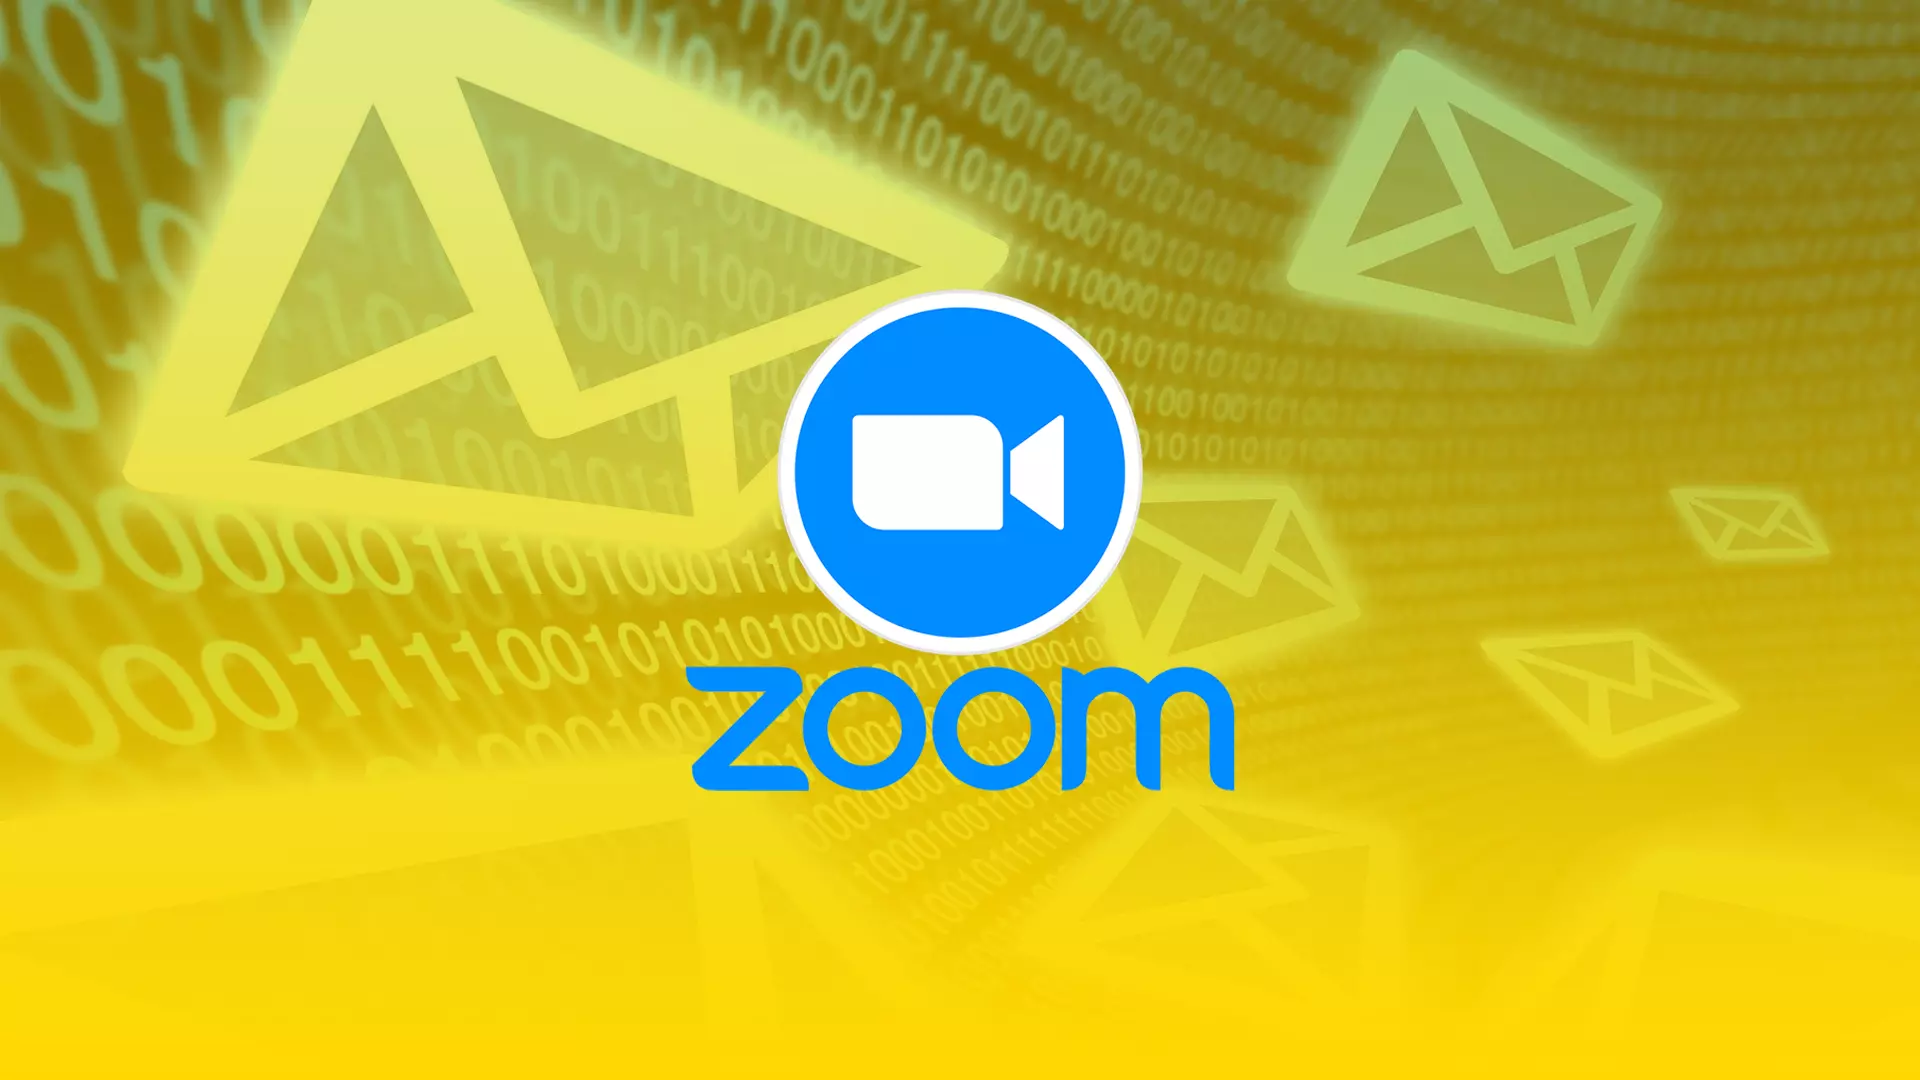 Zoom plans to create its own email and calendar apps